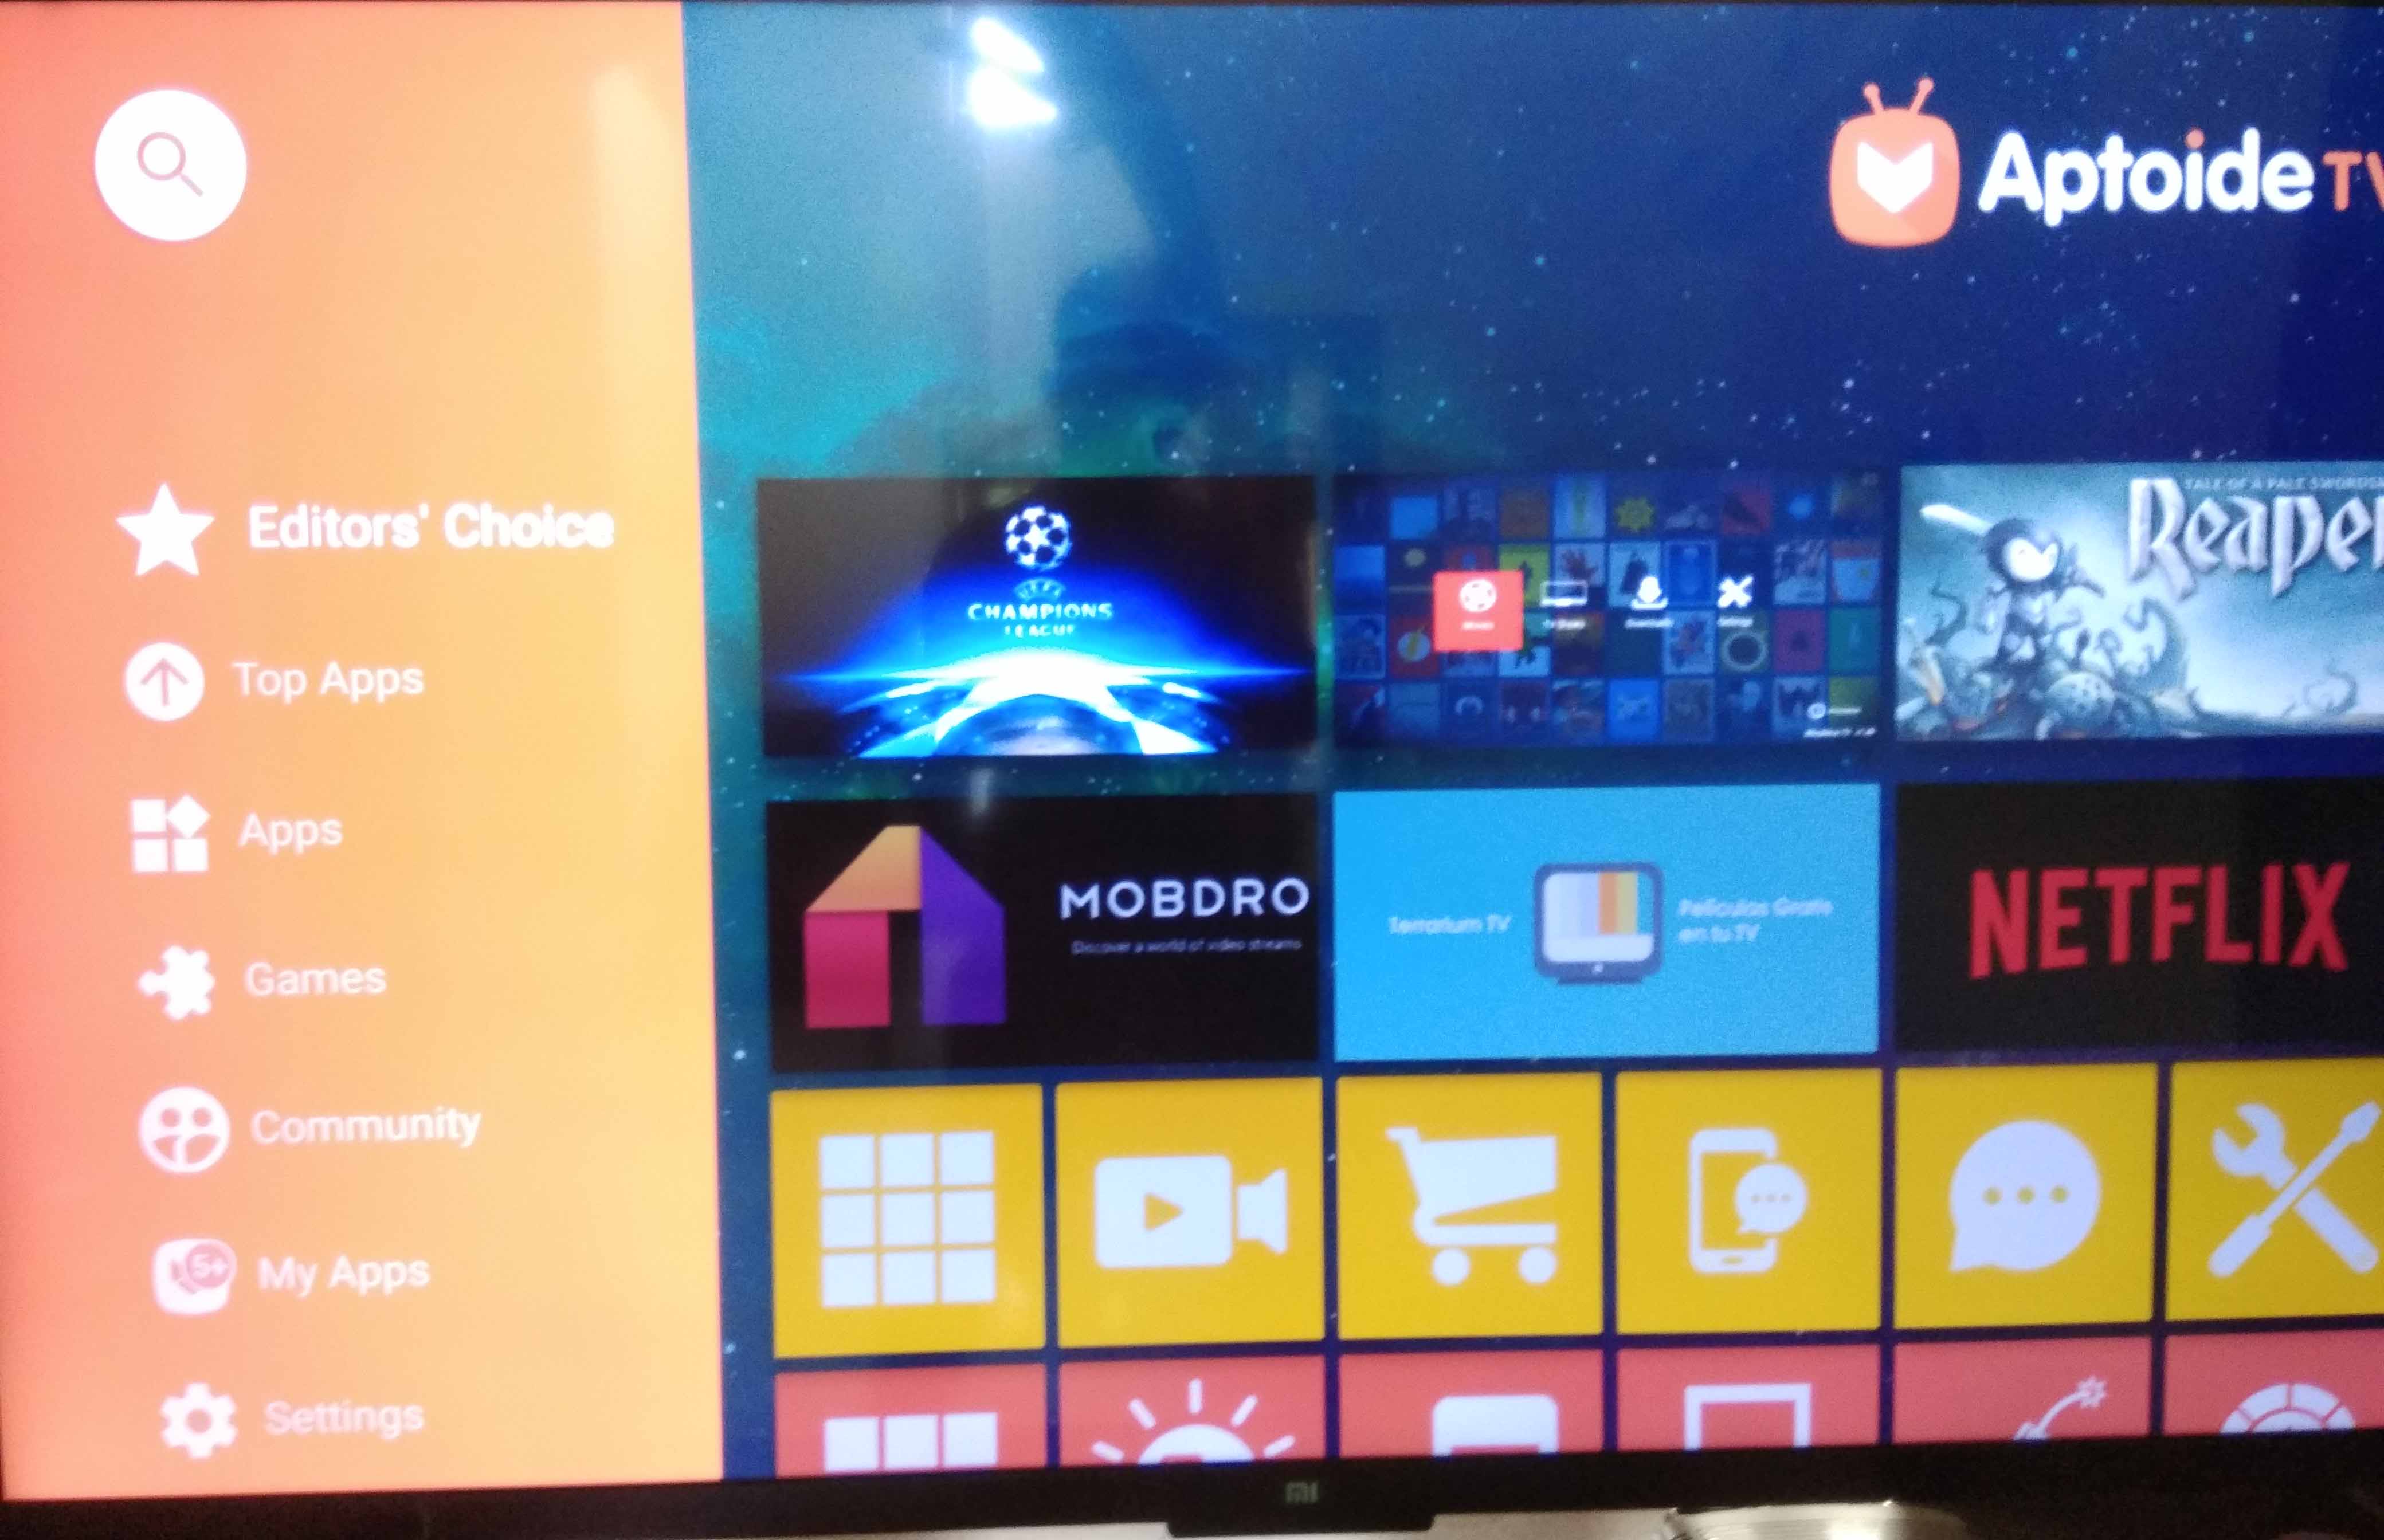 apptoid solve No Play store issue on smart tv